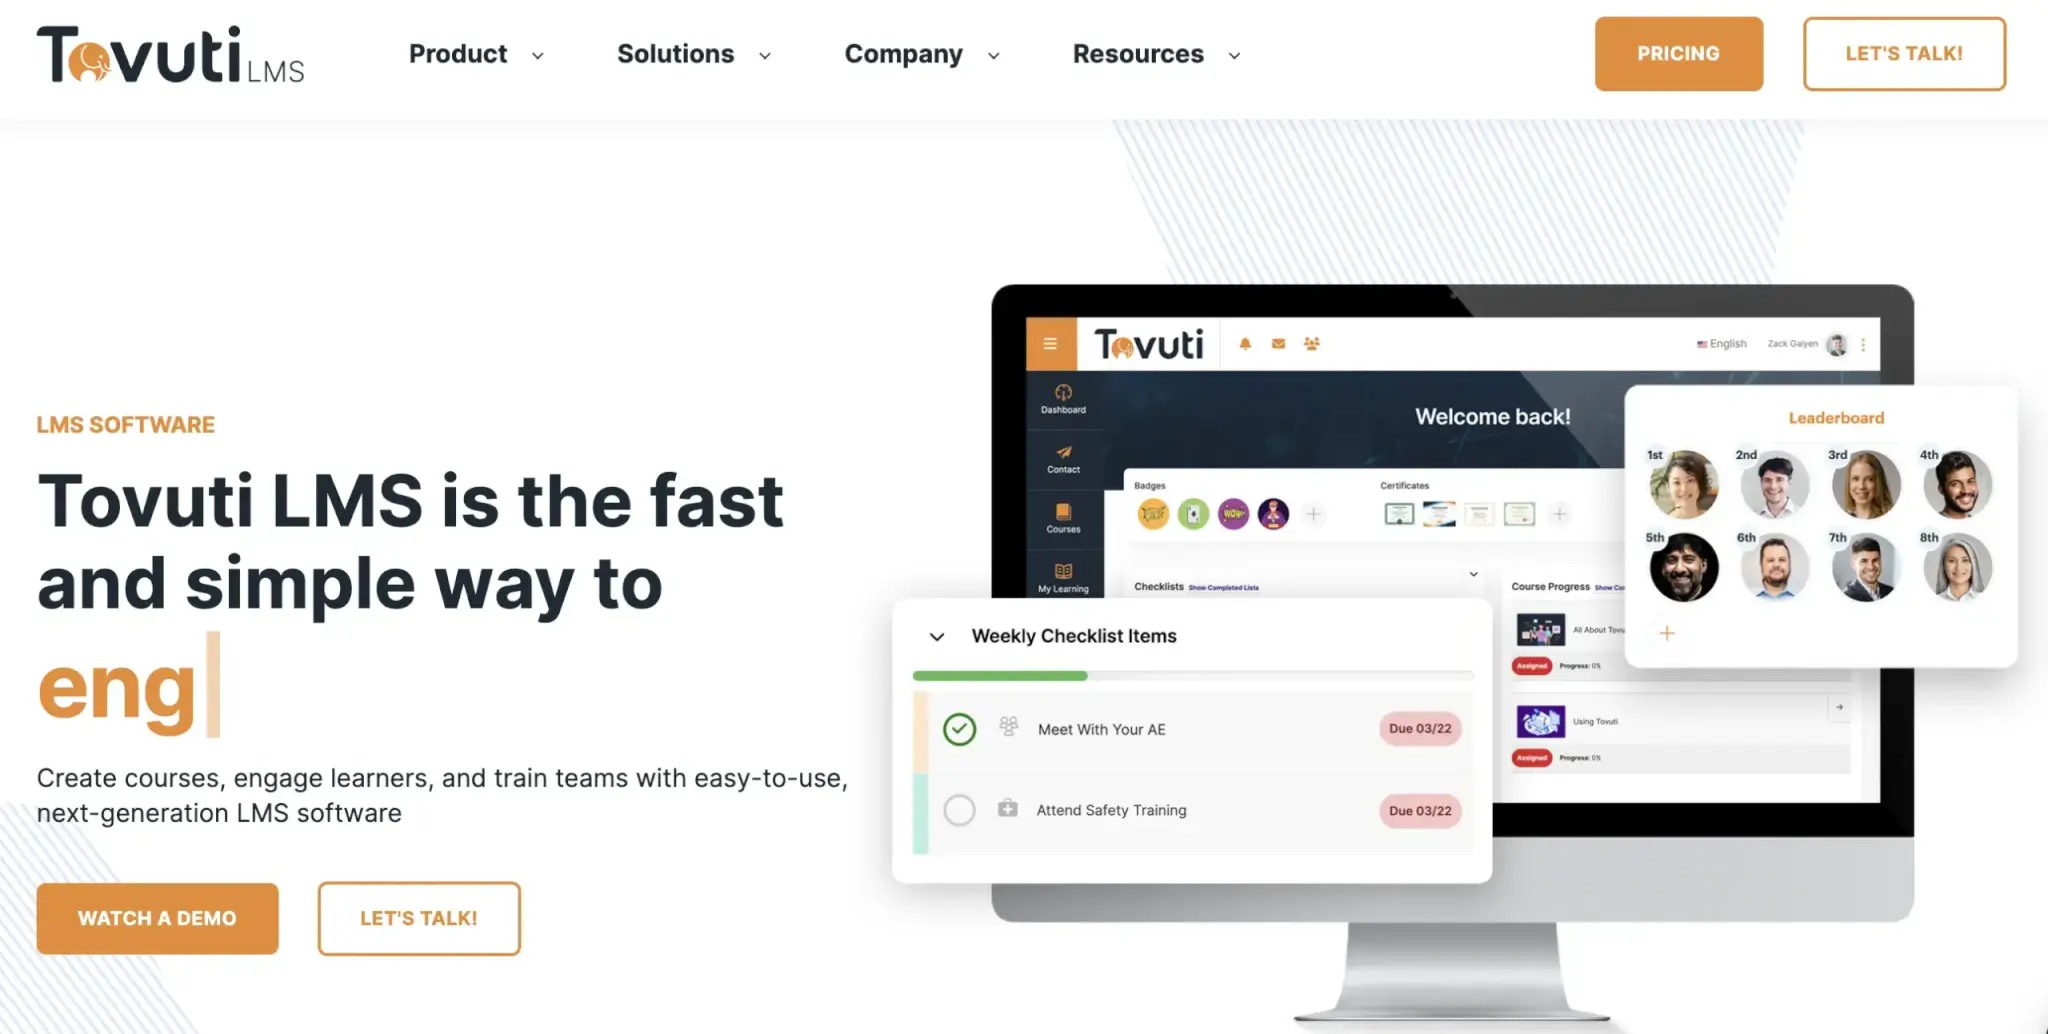 an image of the Tovuti LMS landing page showing the platform's user interface